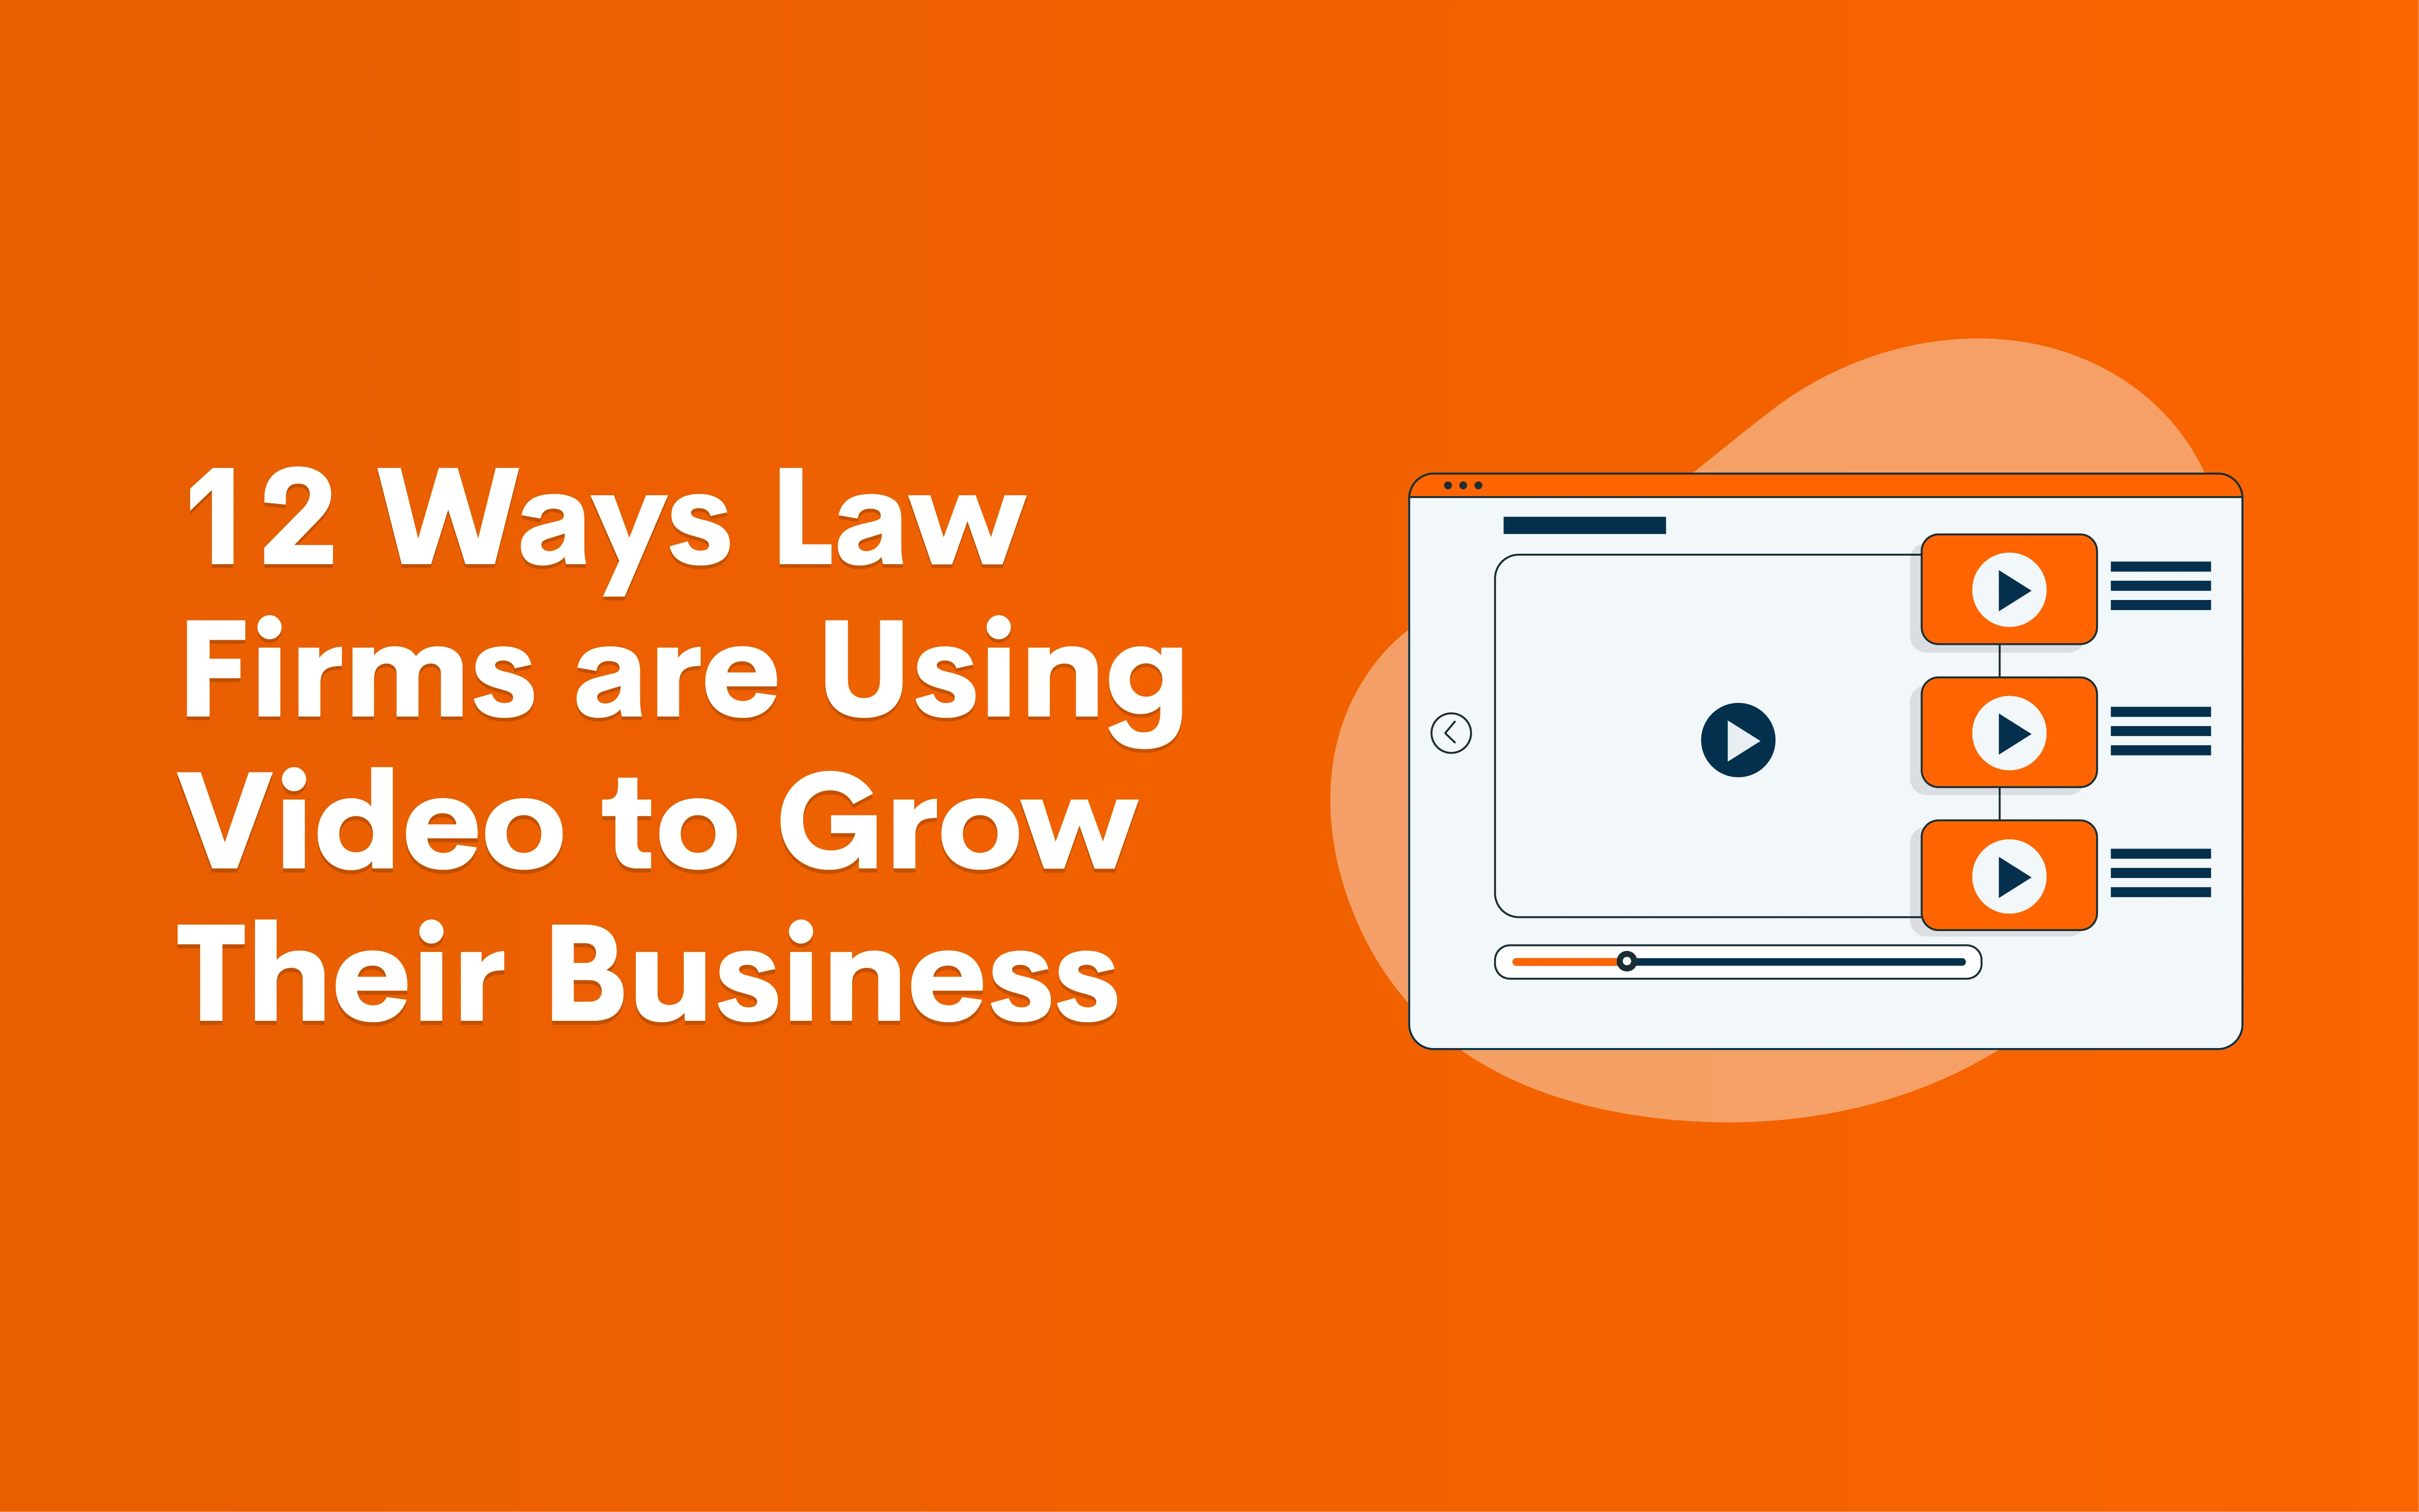 12 Ways Law Firms are Using Video to Grow Their Business